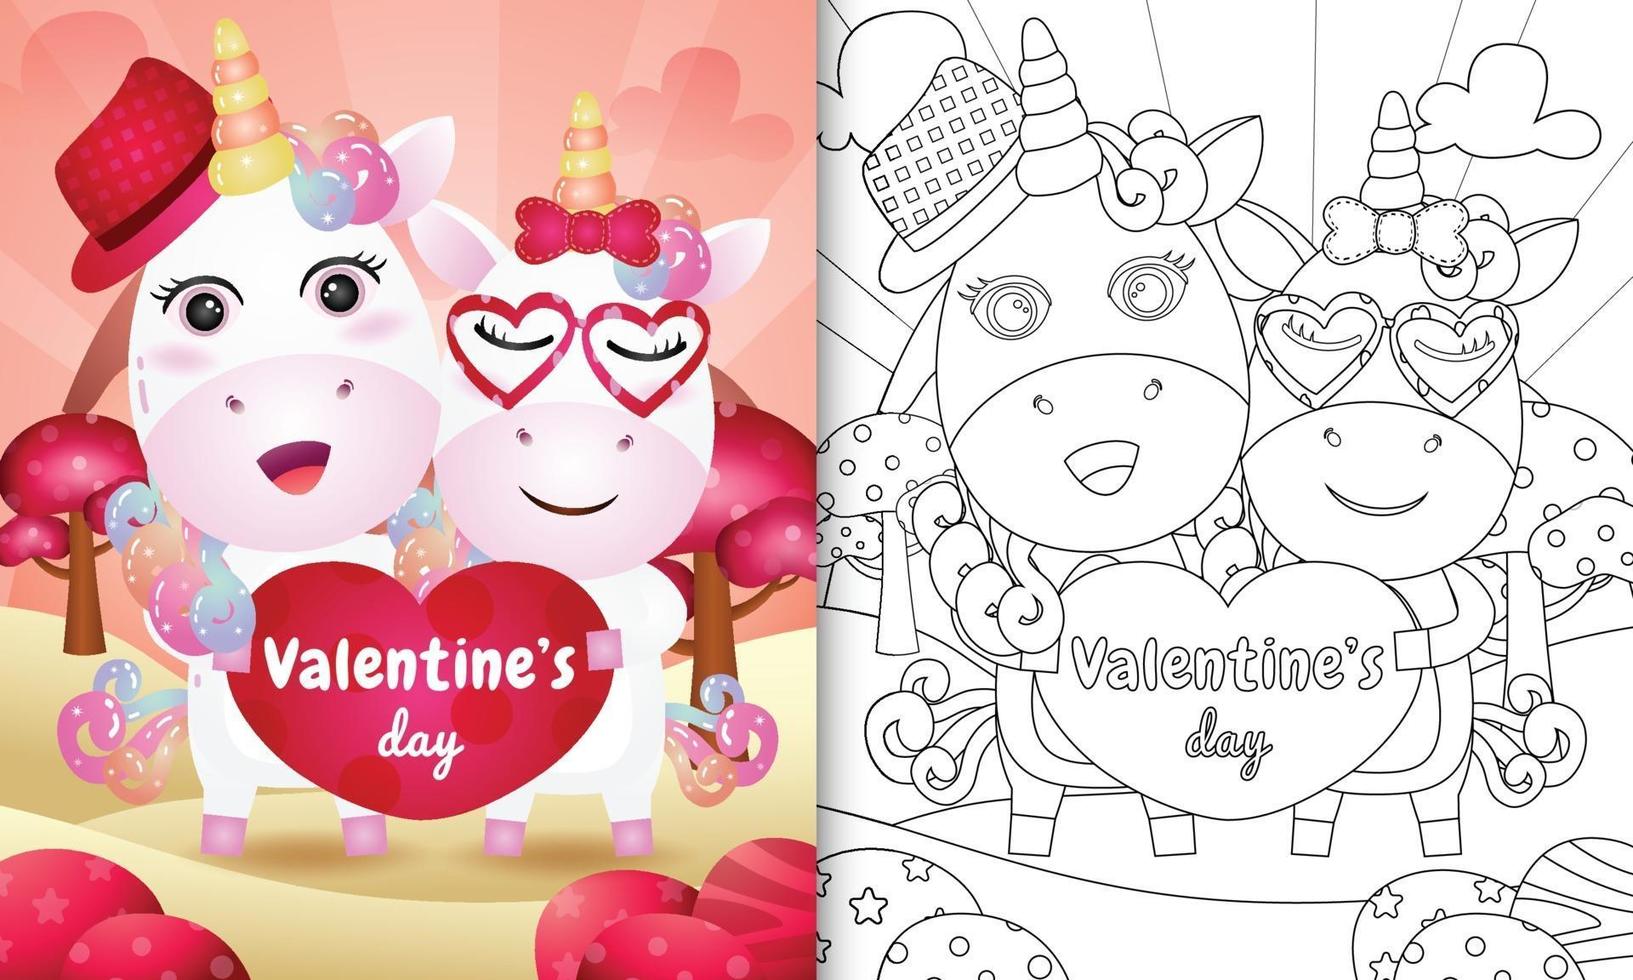 coloring book for kids with Cute valentine's day unicorn couple illustrated vector